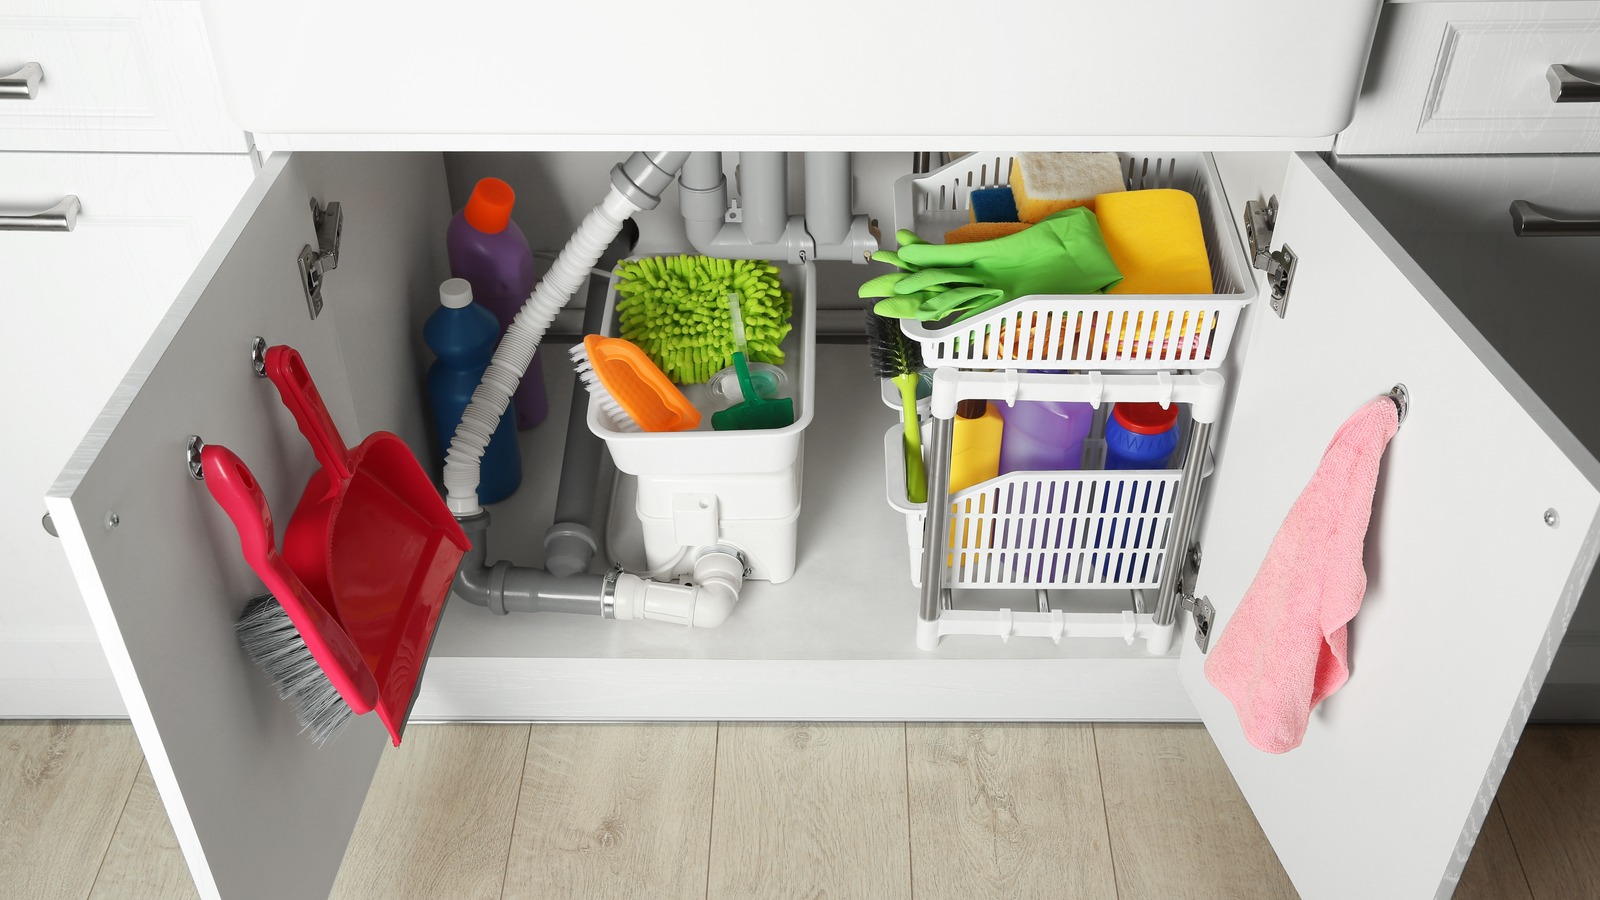 https://www.housedigest.com/img/gallery/4-things-you-should-purge-from-under-your-kitchen-sink/l-intro-1655214815.jpg